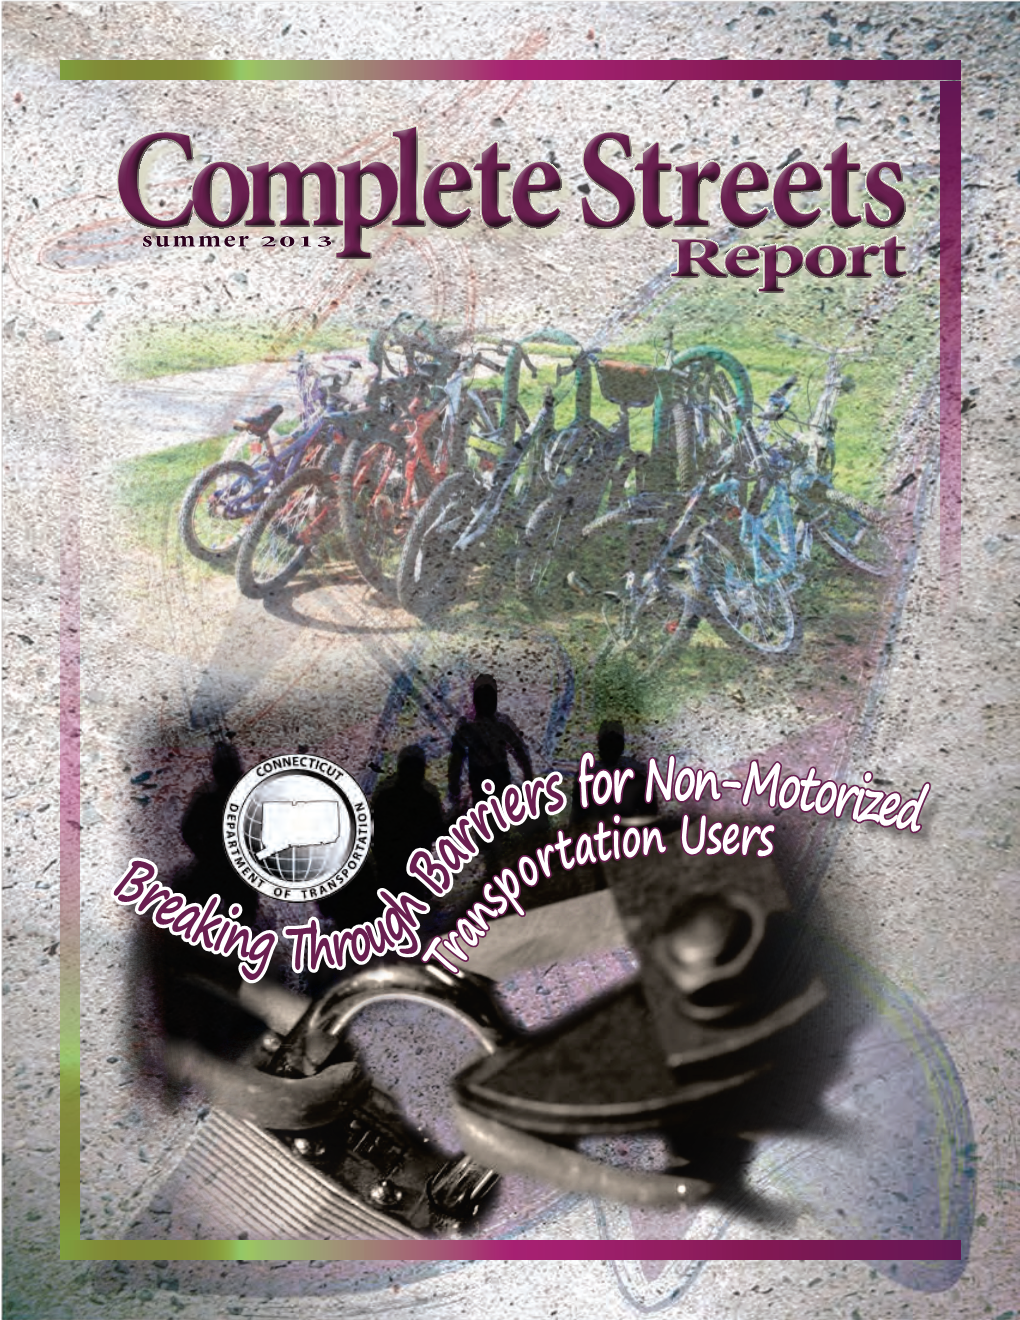 Complete Streets Report: Breaking Through Barriers for Non-Motorized